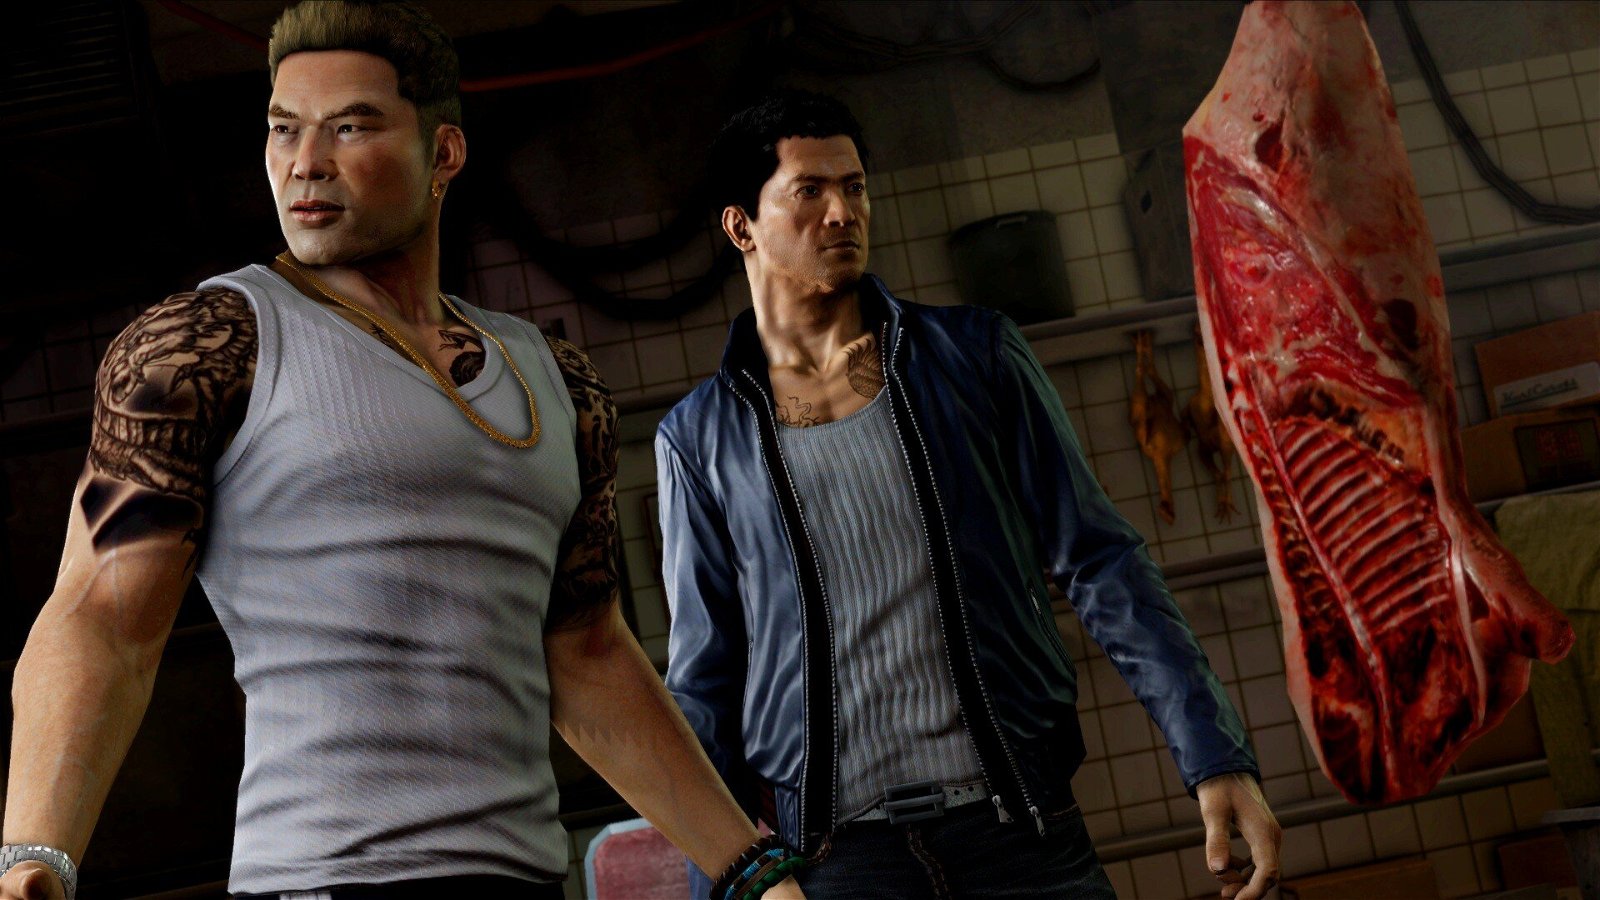 sleeping dogs definitive edition pc vs ps4